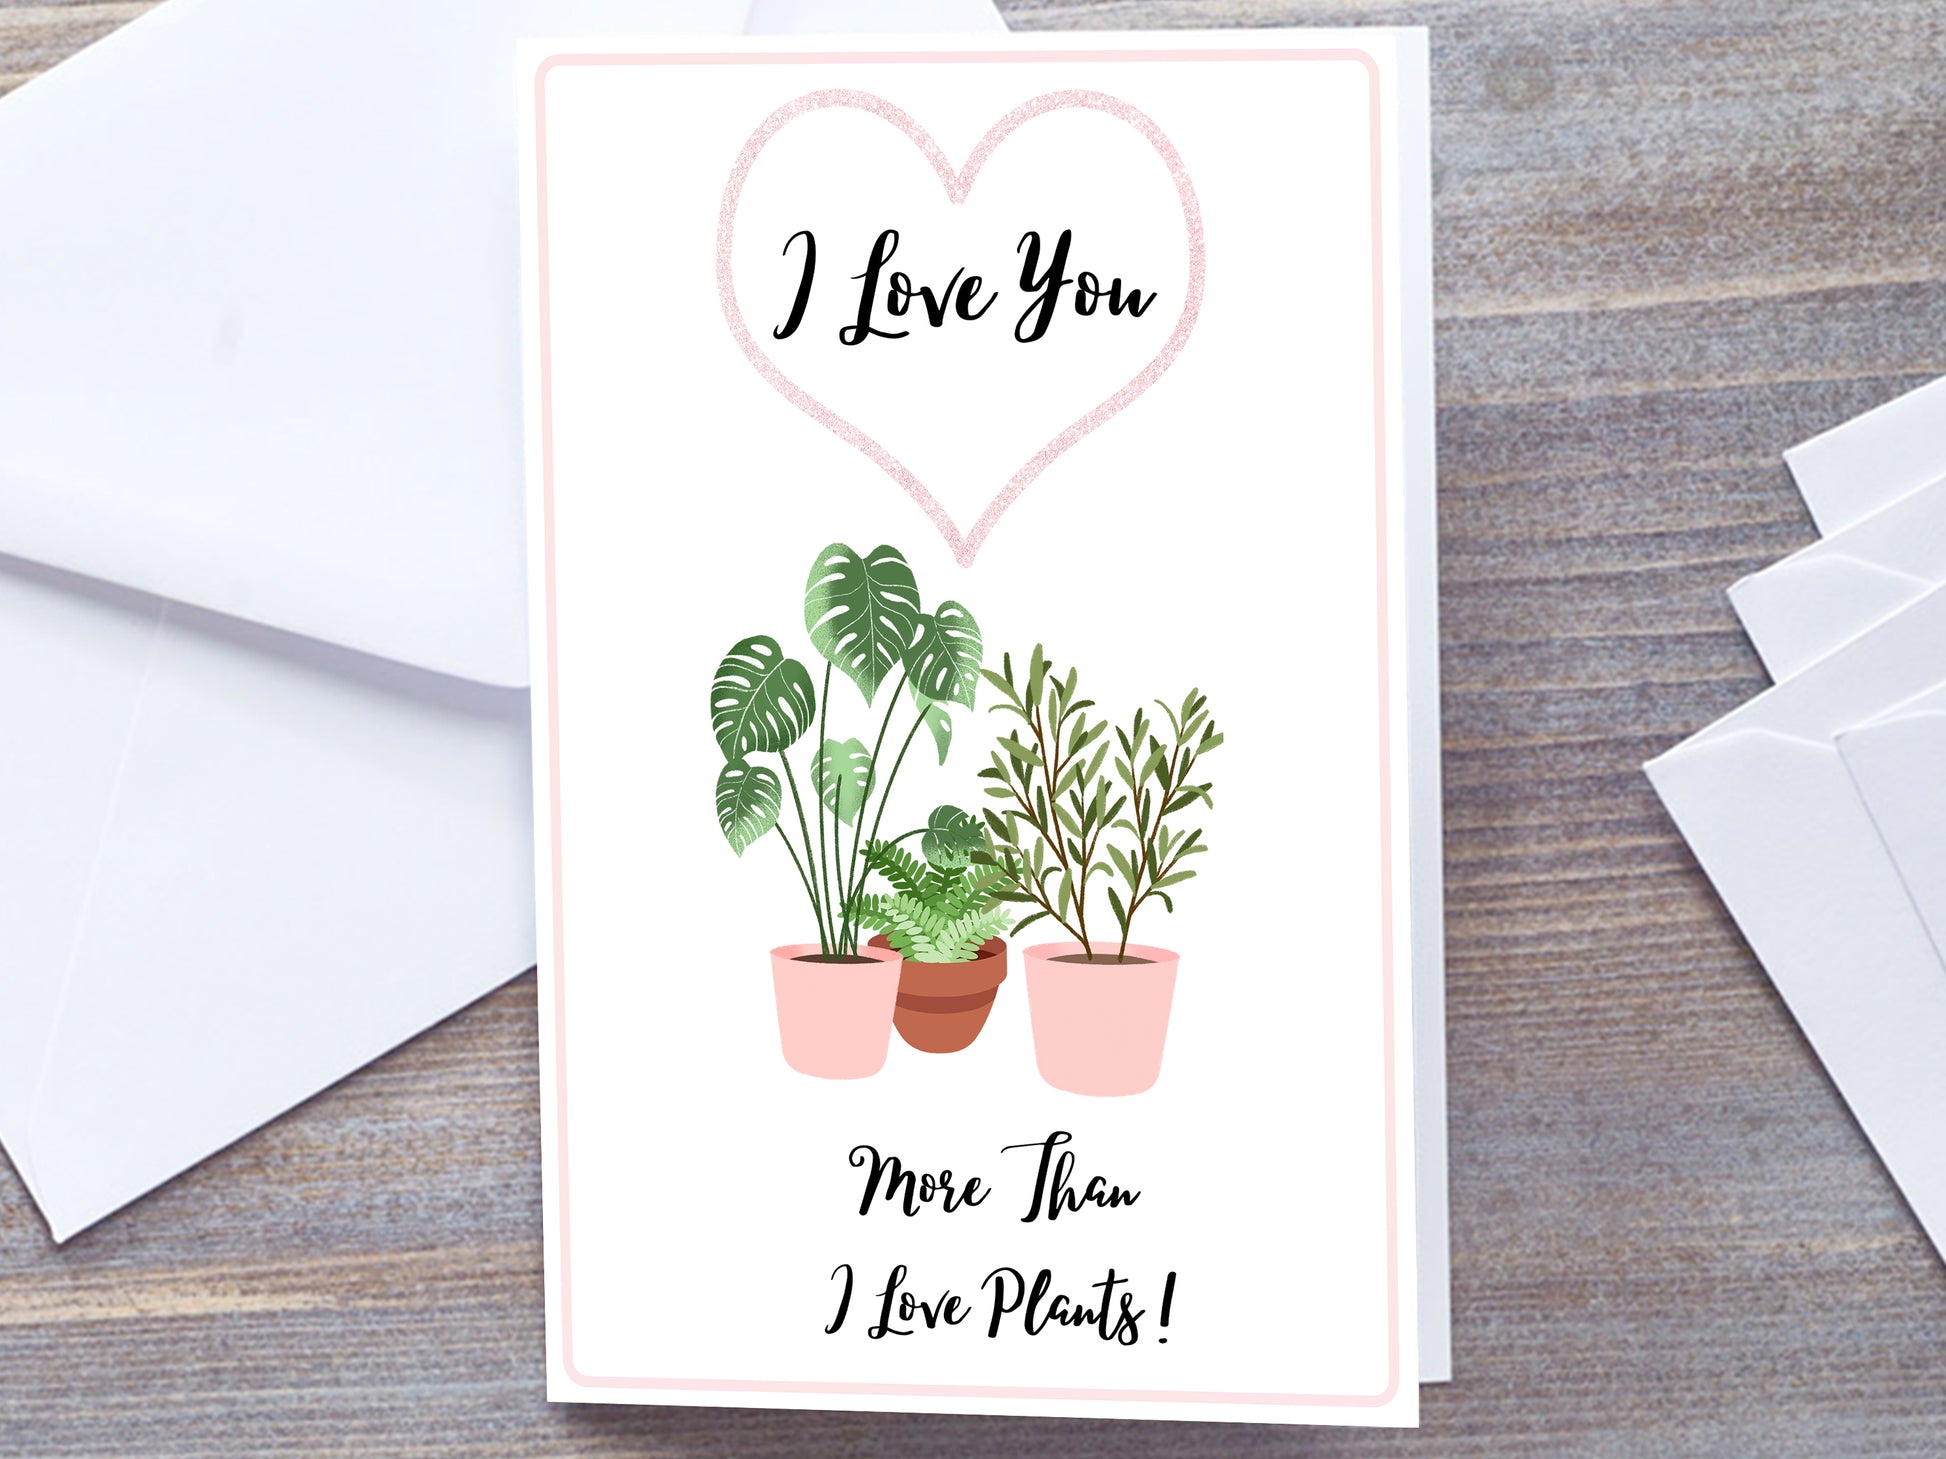 Plant lover Greetings card for anniversary or valentines. White card to 3 House plants in pink plant pots. Wording I love you inside a pink heart outline. Below plant images is wording More than I love plants! In handwriting script text. Card resting on Grey wooden background with white envelope 